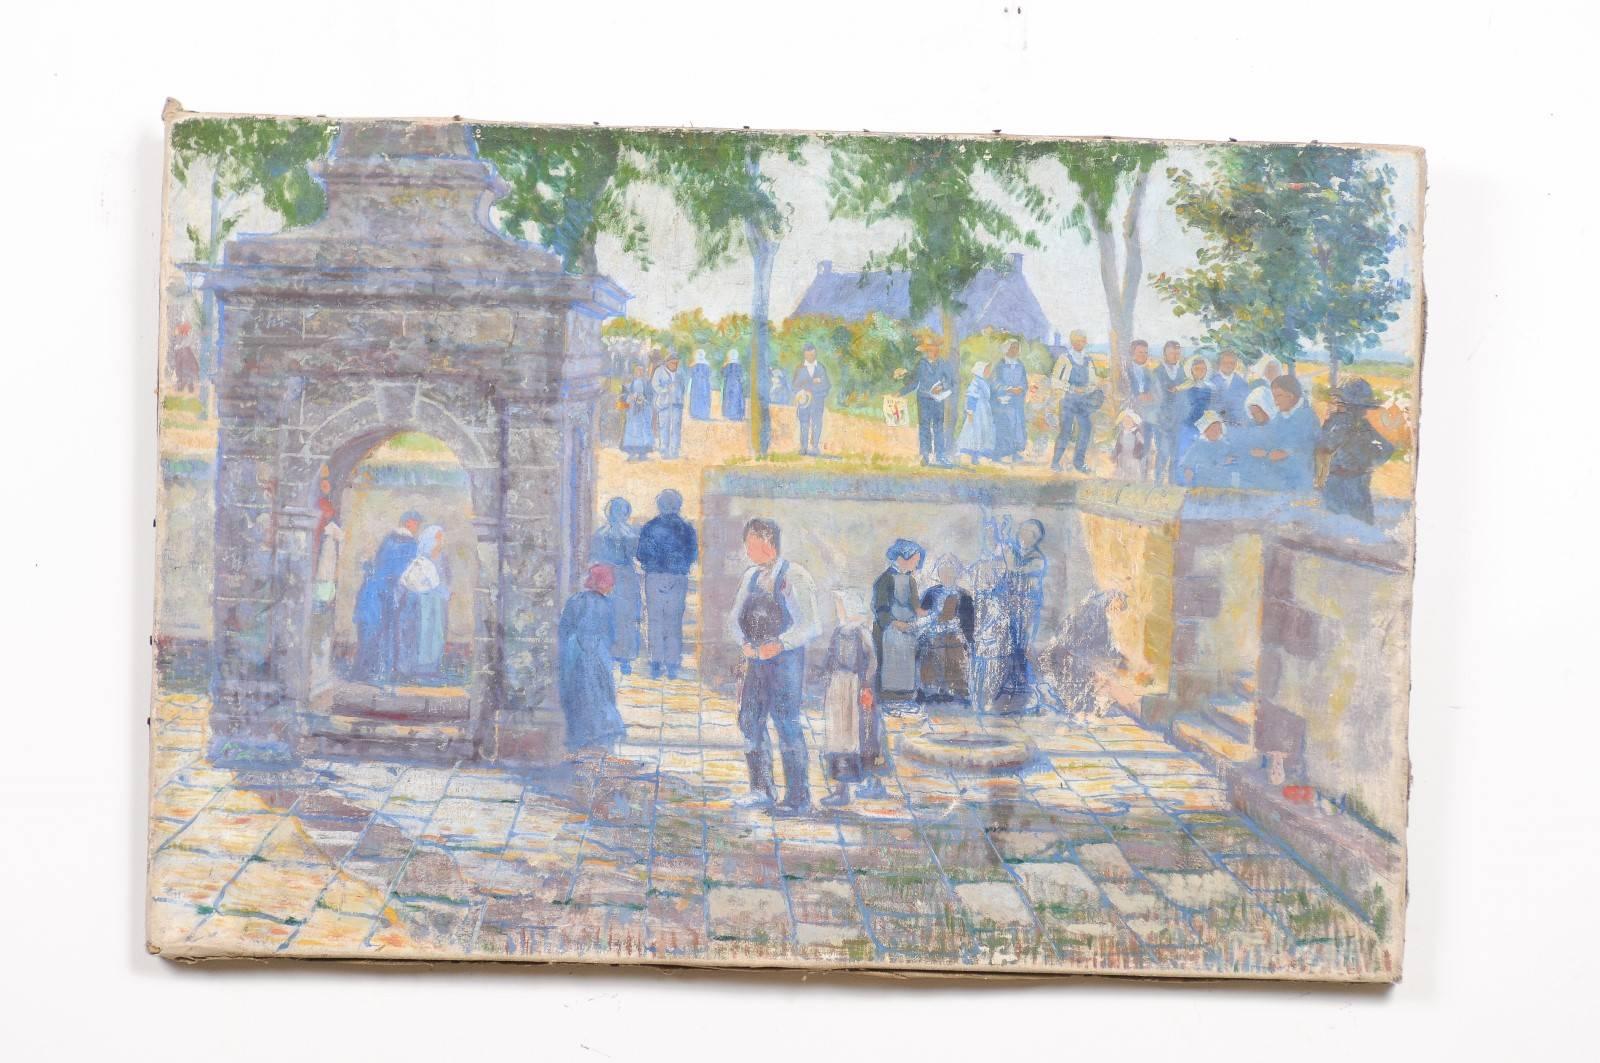 A French late 19th century oil on canvas painting from Aix-en-Provence depicting a social gathering in shades of blue. Born in Southern France during the 1890s, this unframed French horizontal painting depicts a social gathering spread out on two